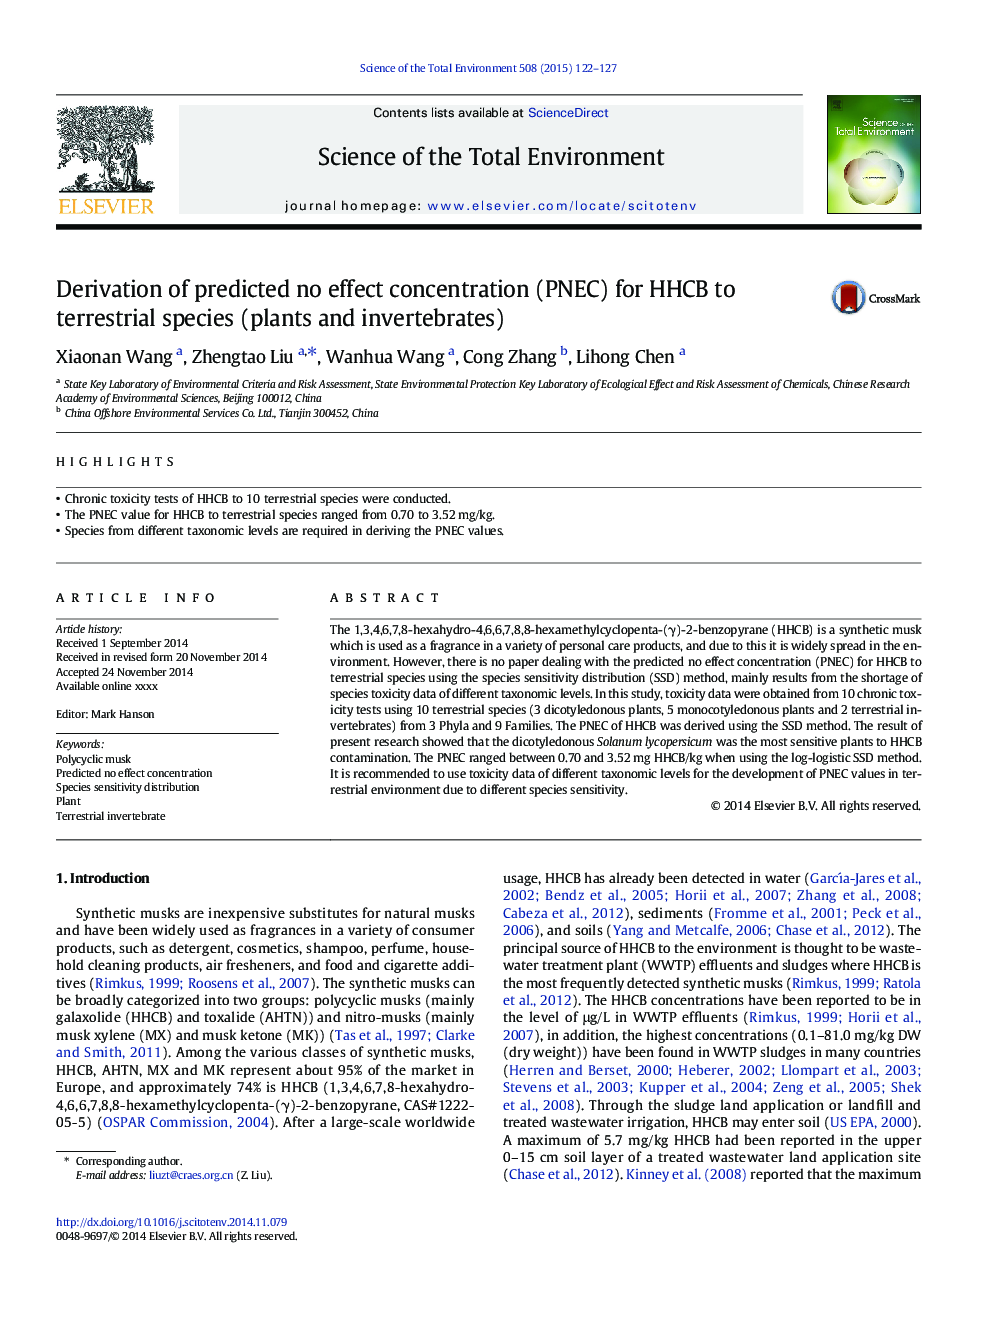 Derivation of predicted no effect concentration (PNEC) for HHCB to terrestrial species (plants and invertebrates)